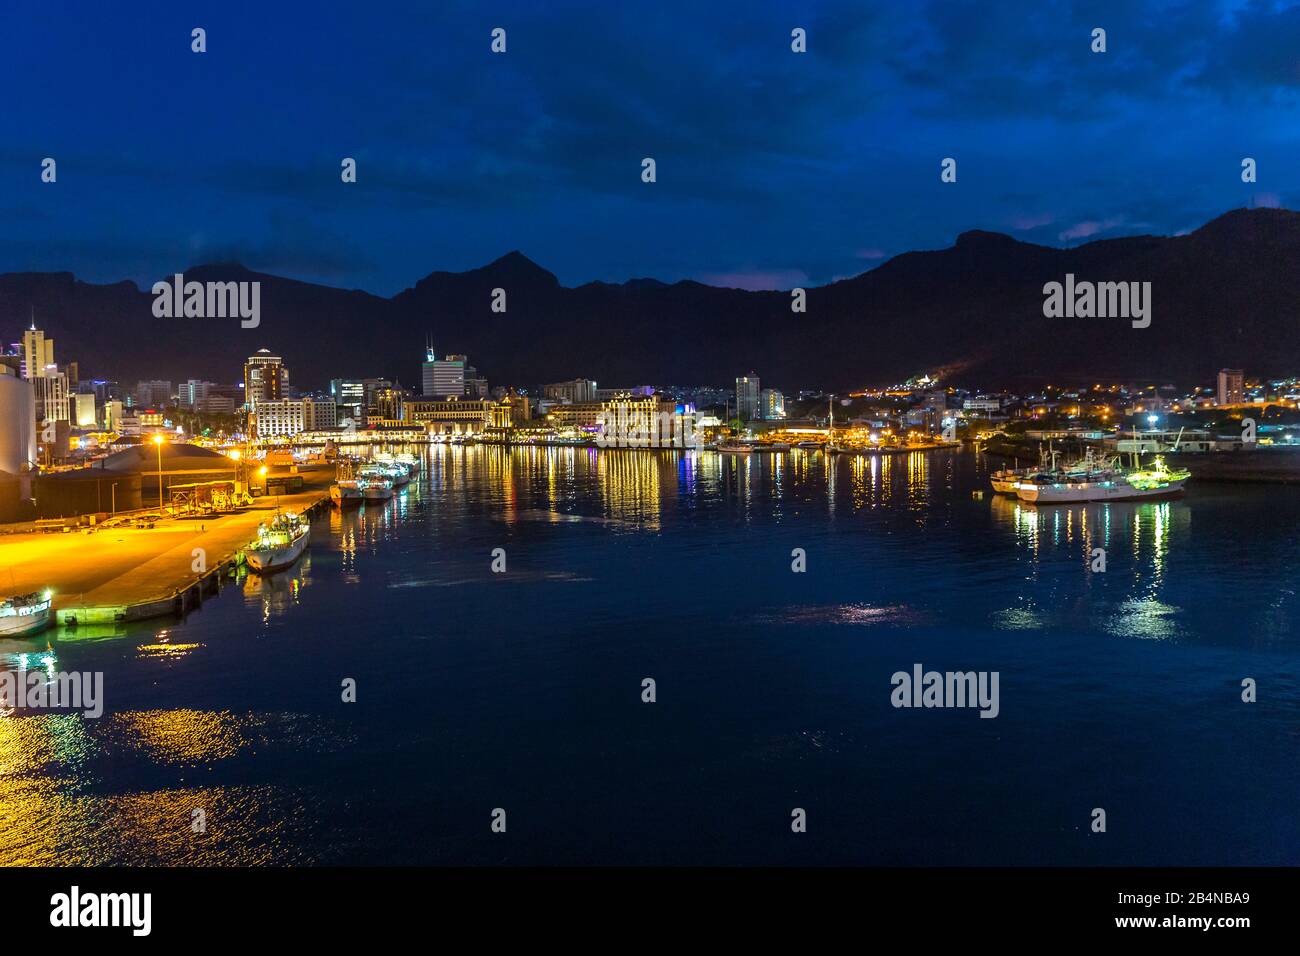 View from the cruise ship of the city, Port Louis, Republic of Mauritius, Indian Ocean Stock Photo